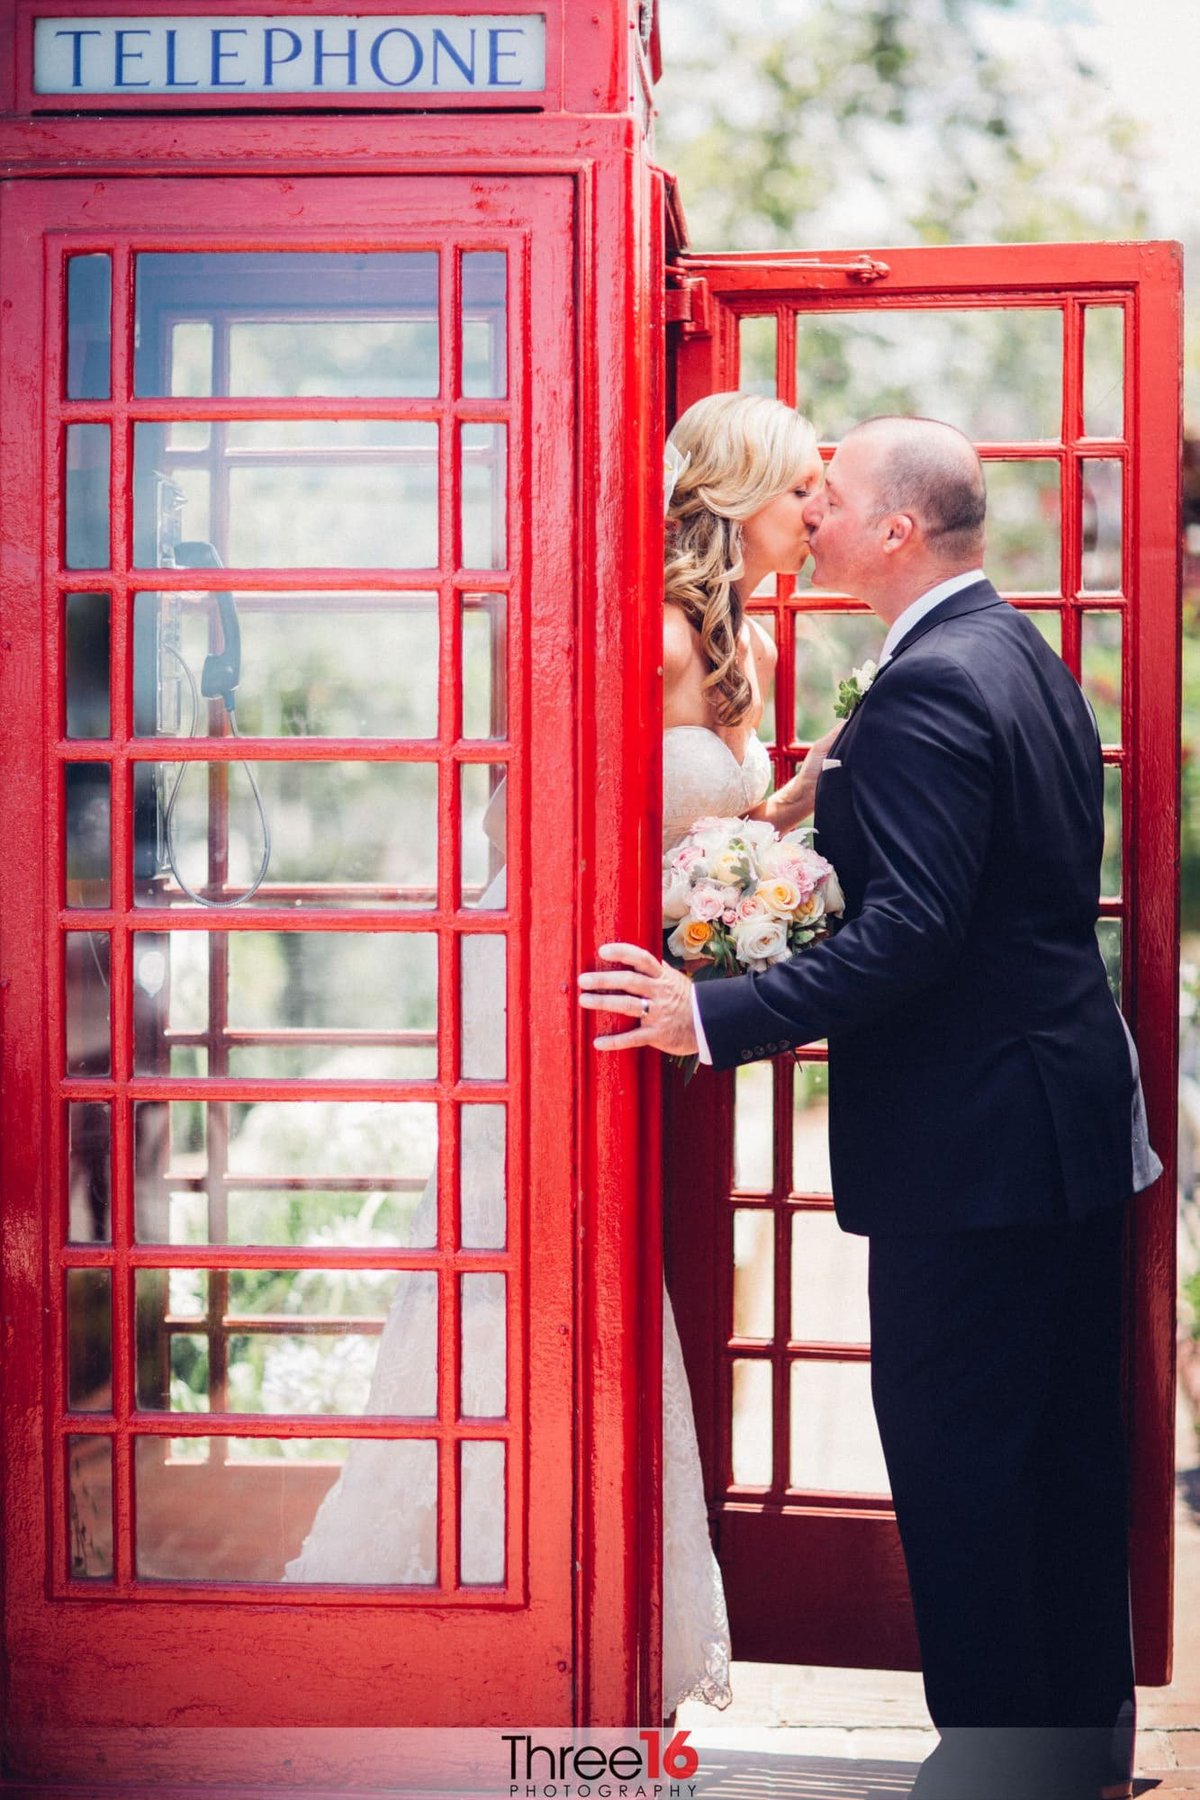 Bride stands in an older looking English telephone booth as leans out to kiss her Groom